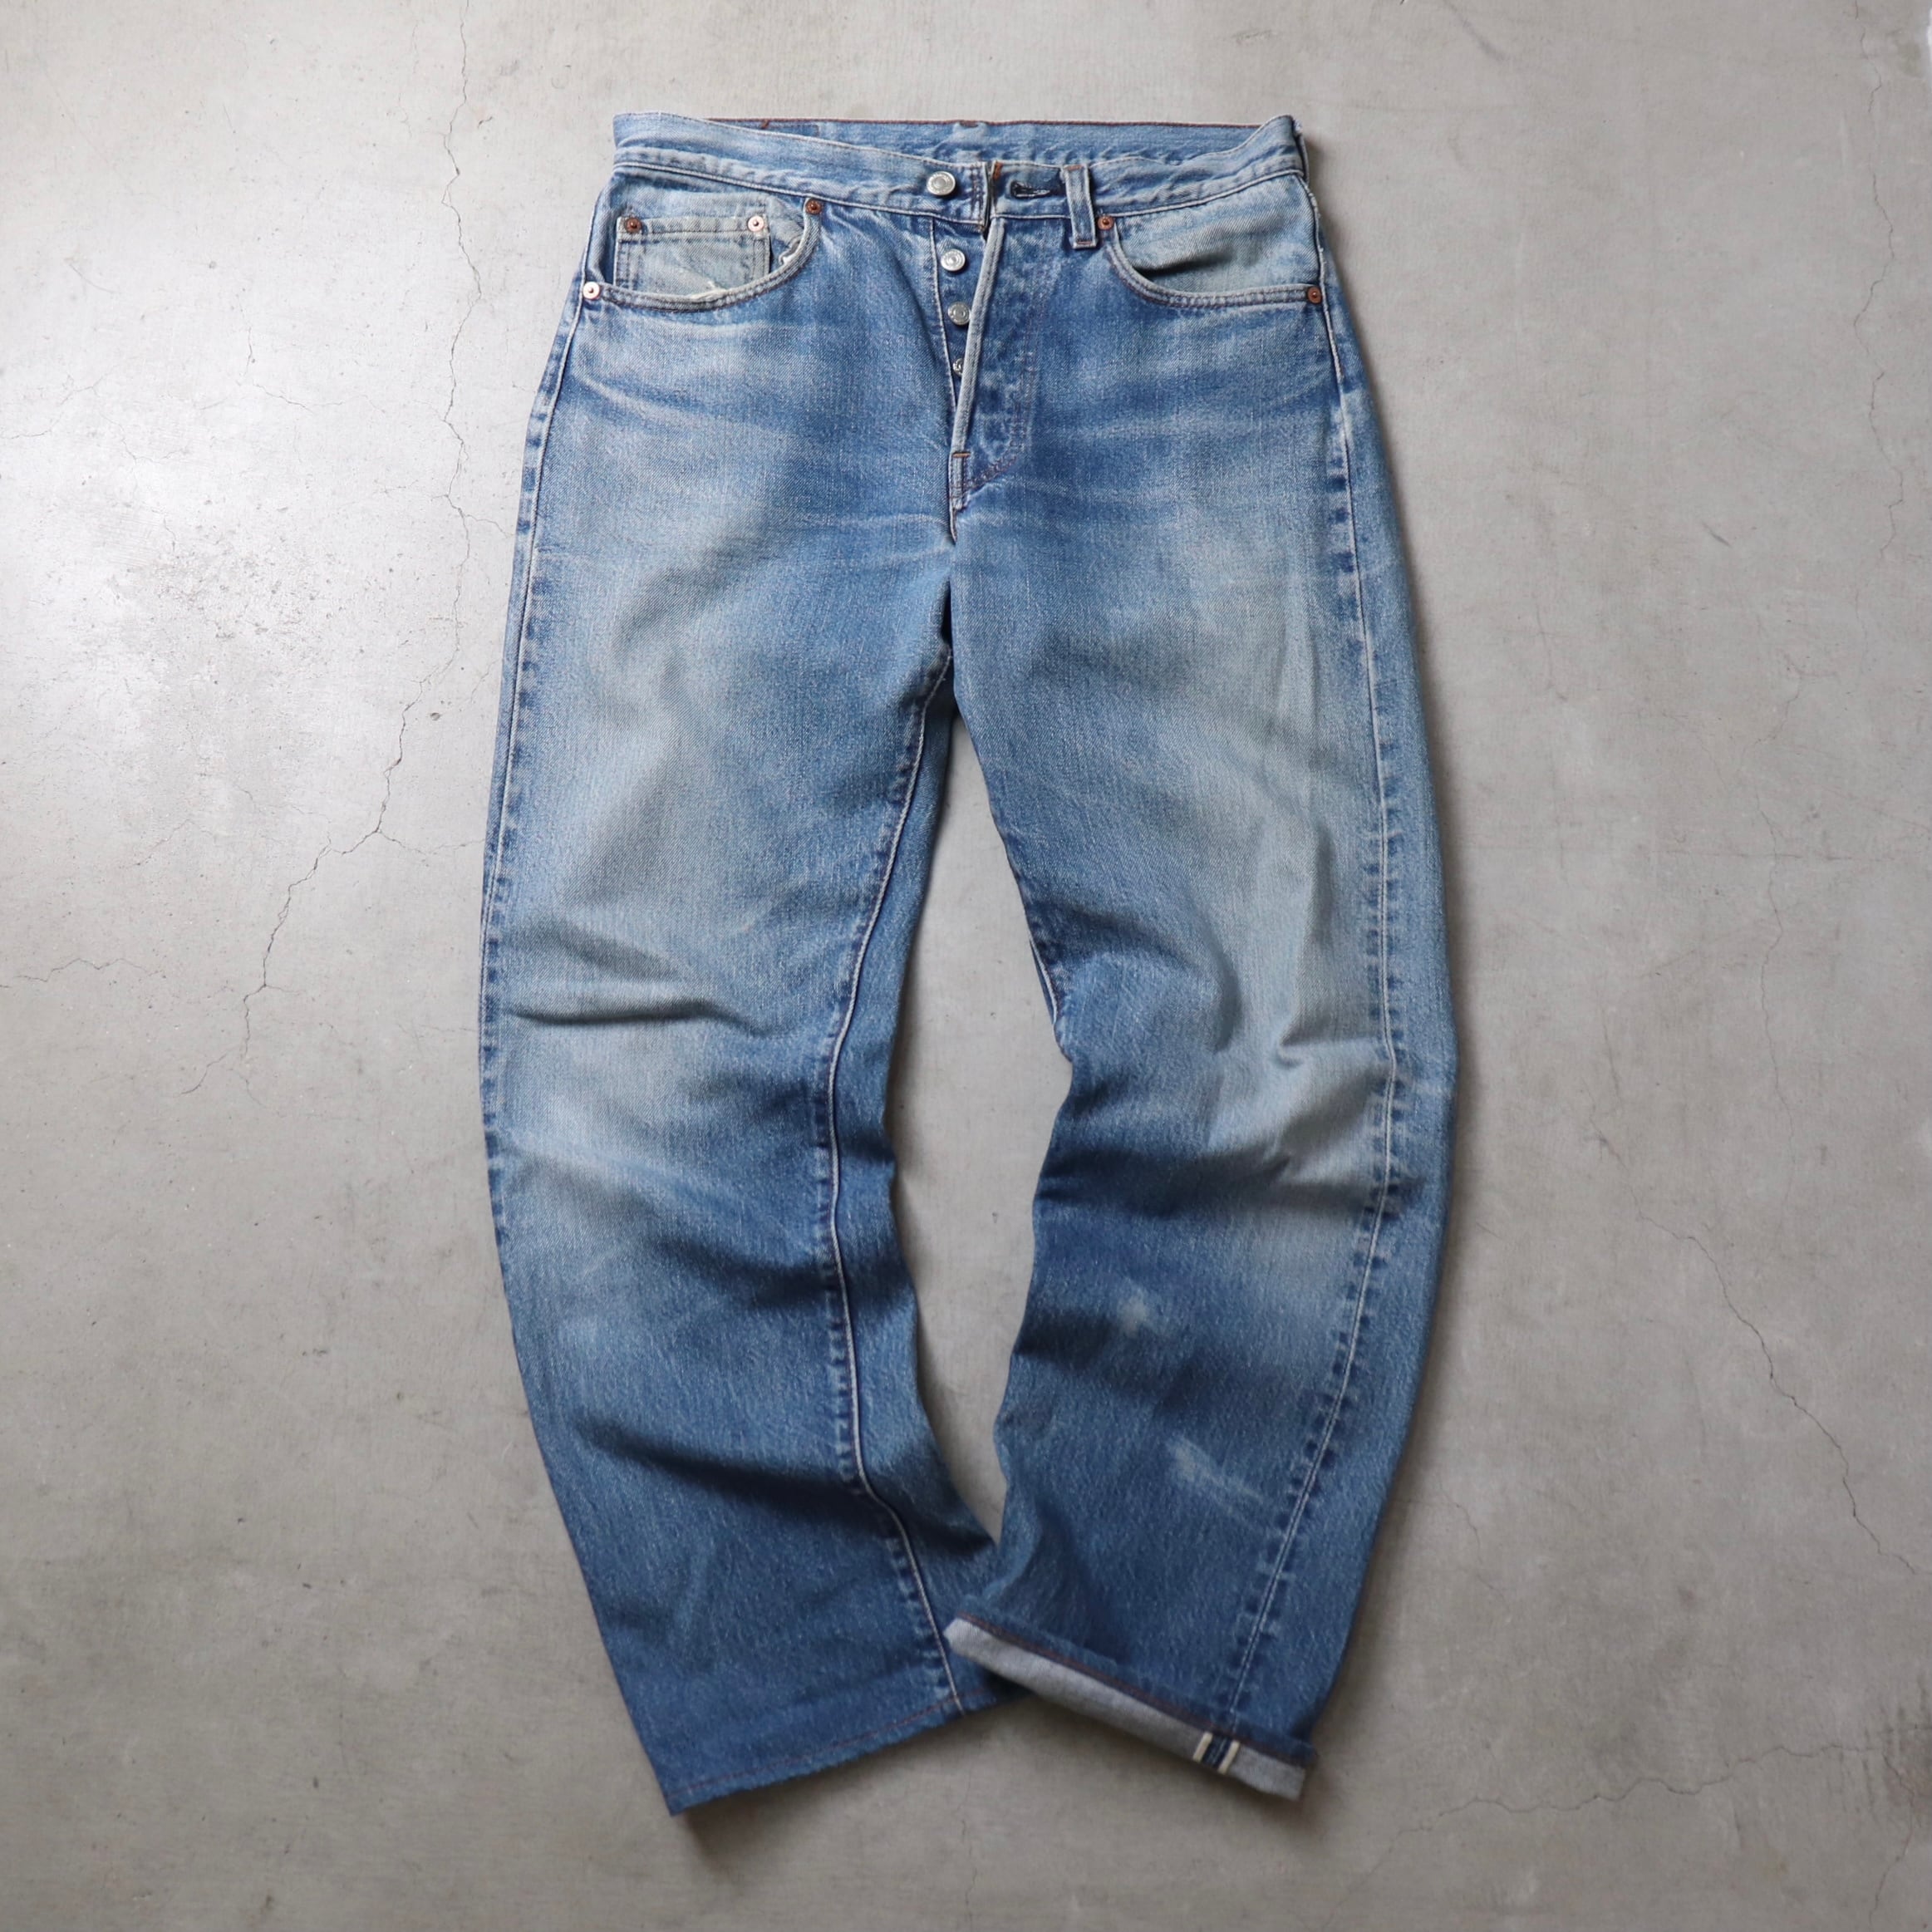 1980s Levi's 501 赤耳 実寸W32L29 D294 | ROGER'S used clothing ...